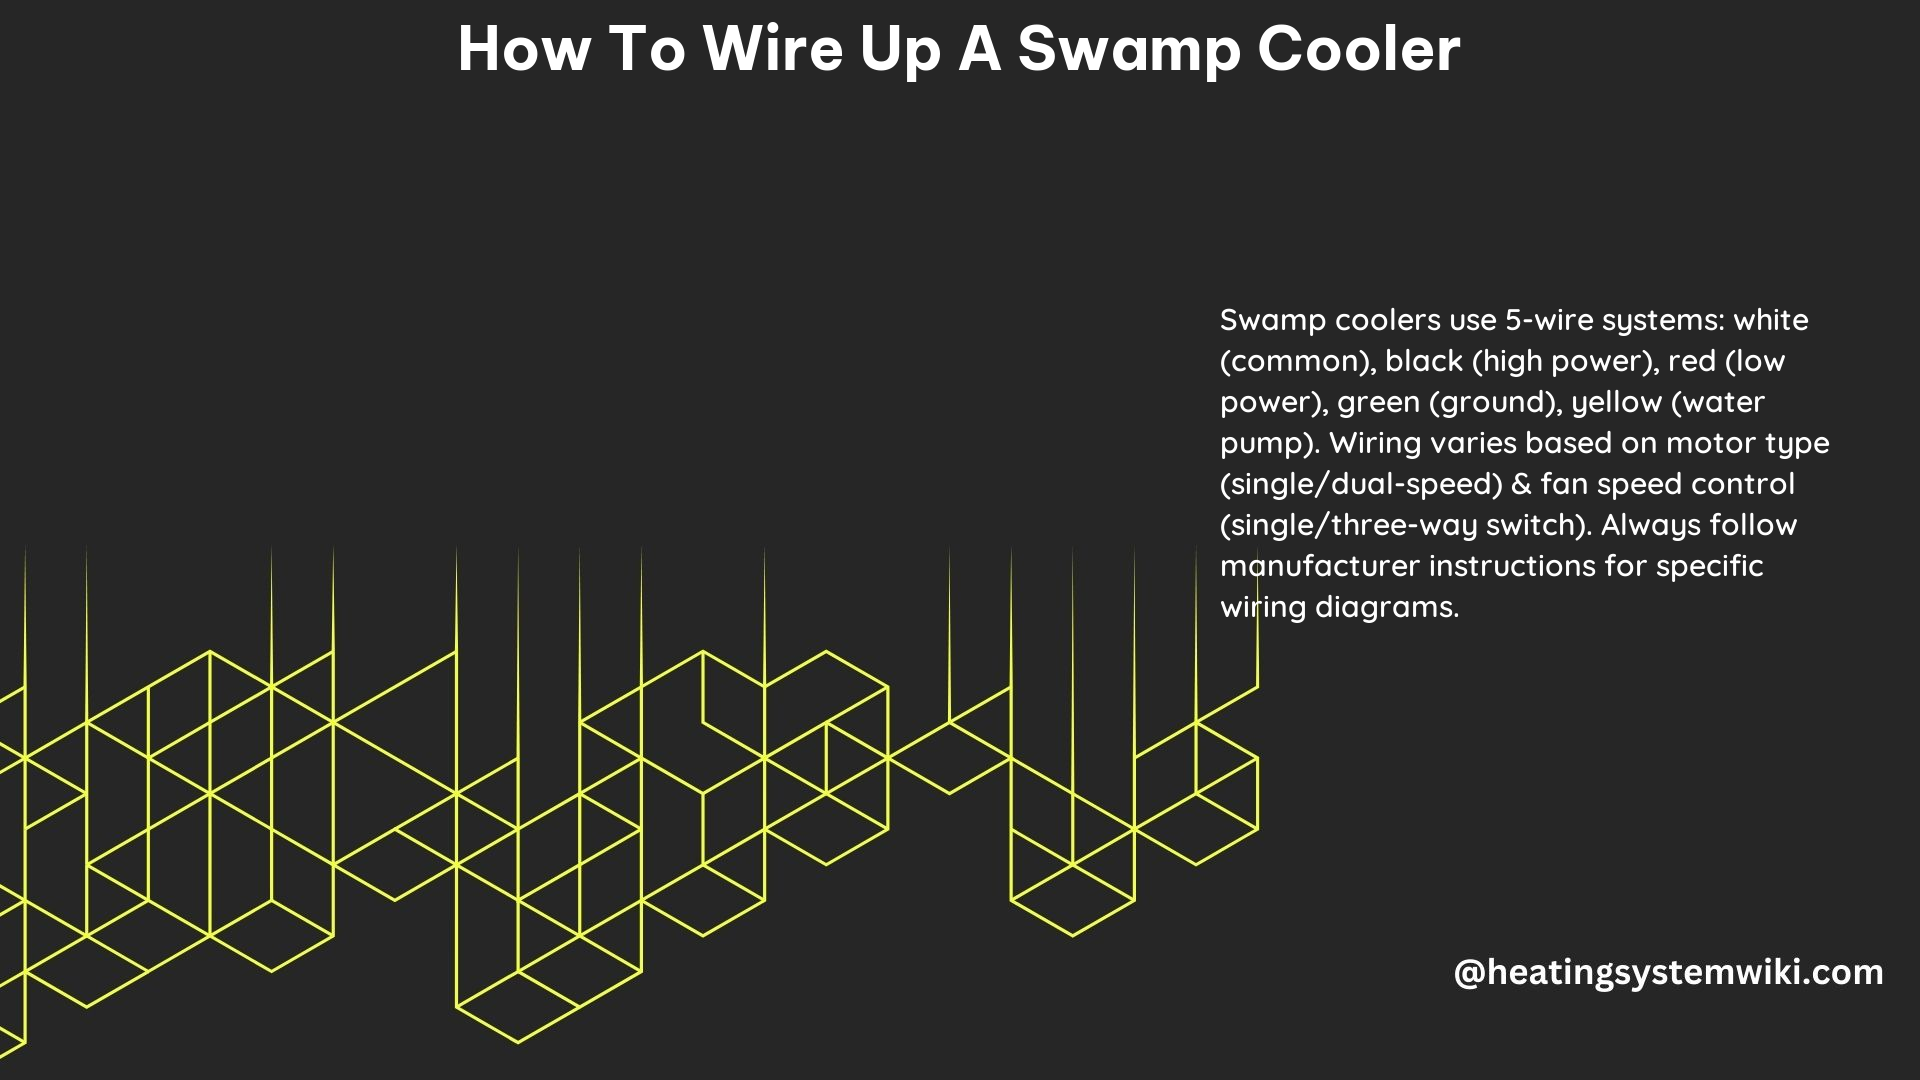 How to Wire up a Swamp Cooler